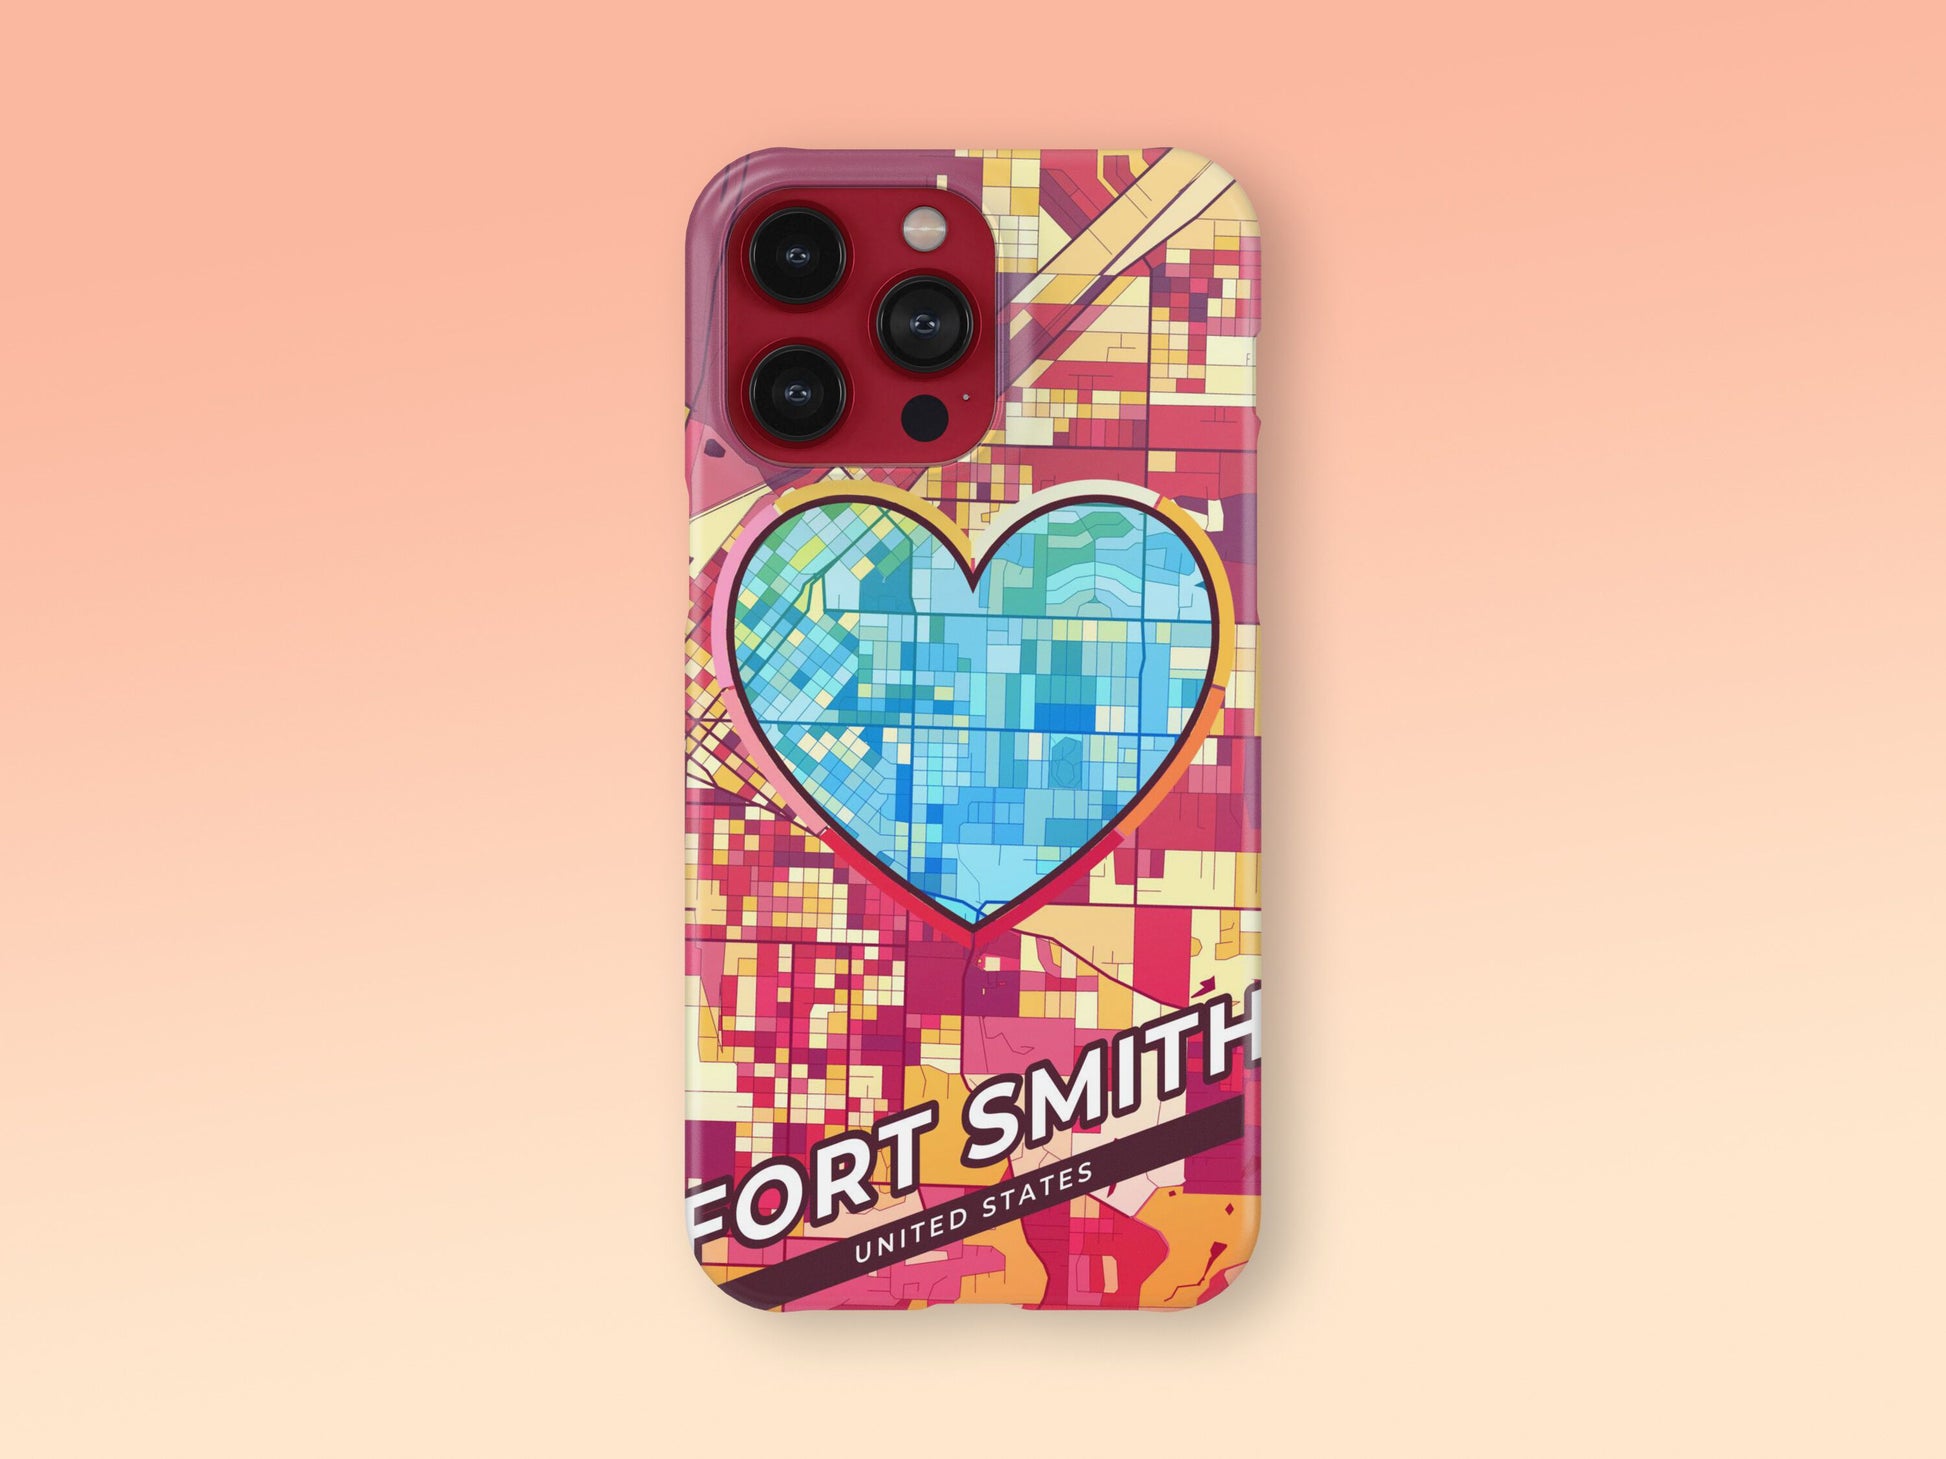 Fort Smith Arkansas slim phone case with colorful icon. Birthday, wedding or housewarming gift. Couple match cases. 2